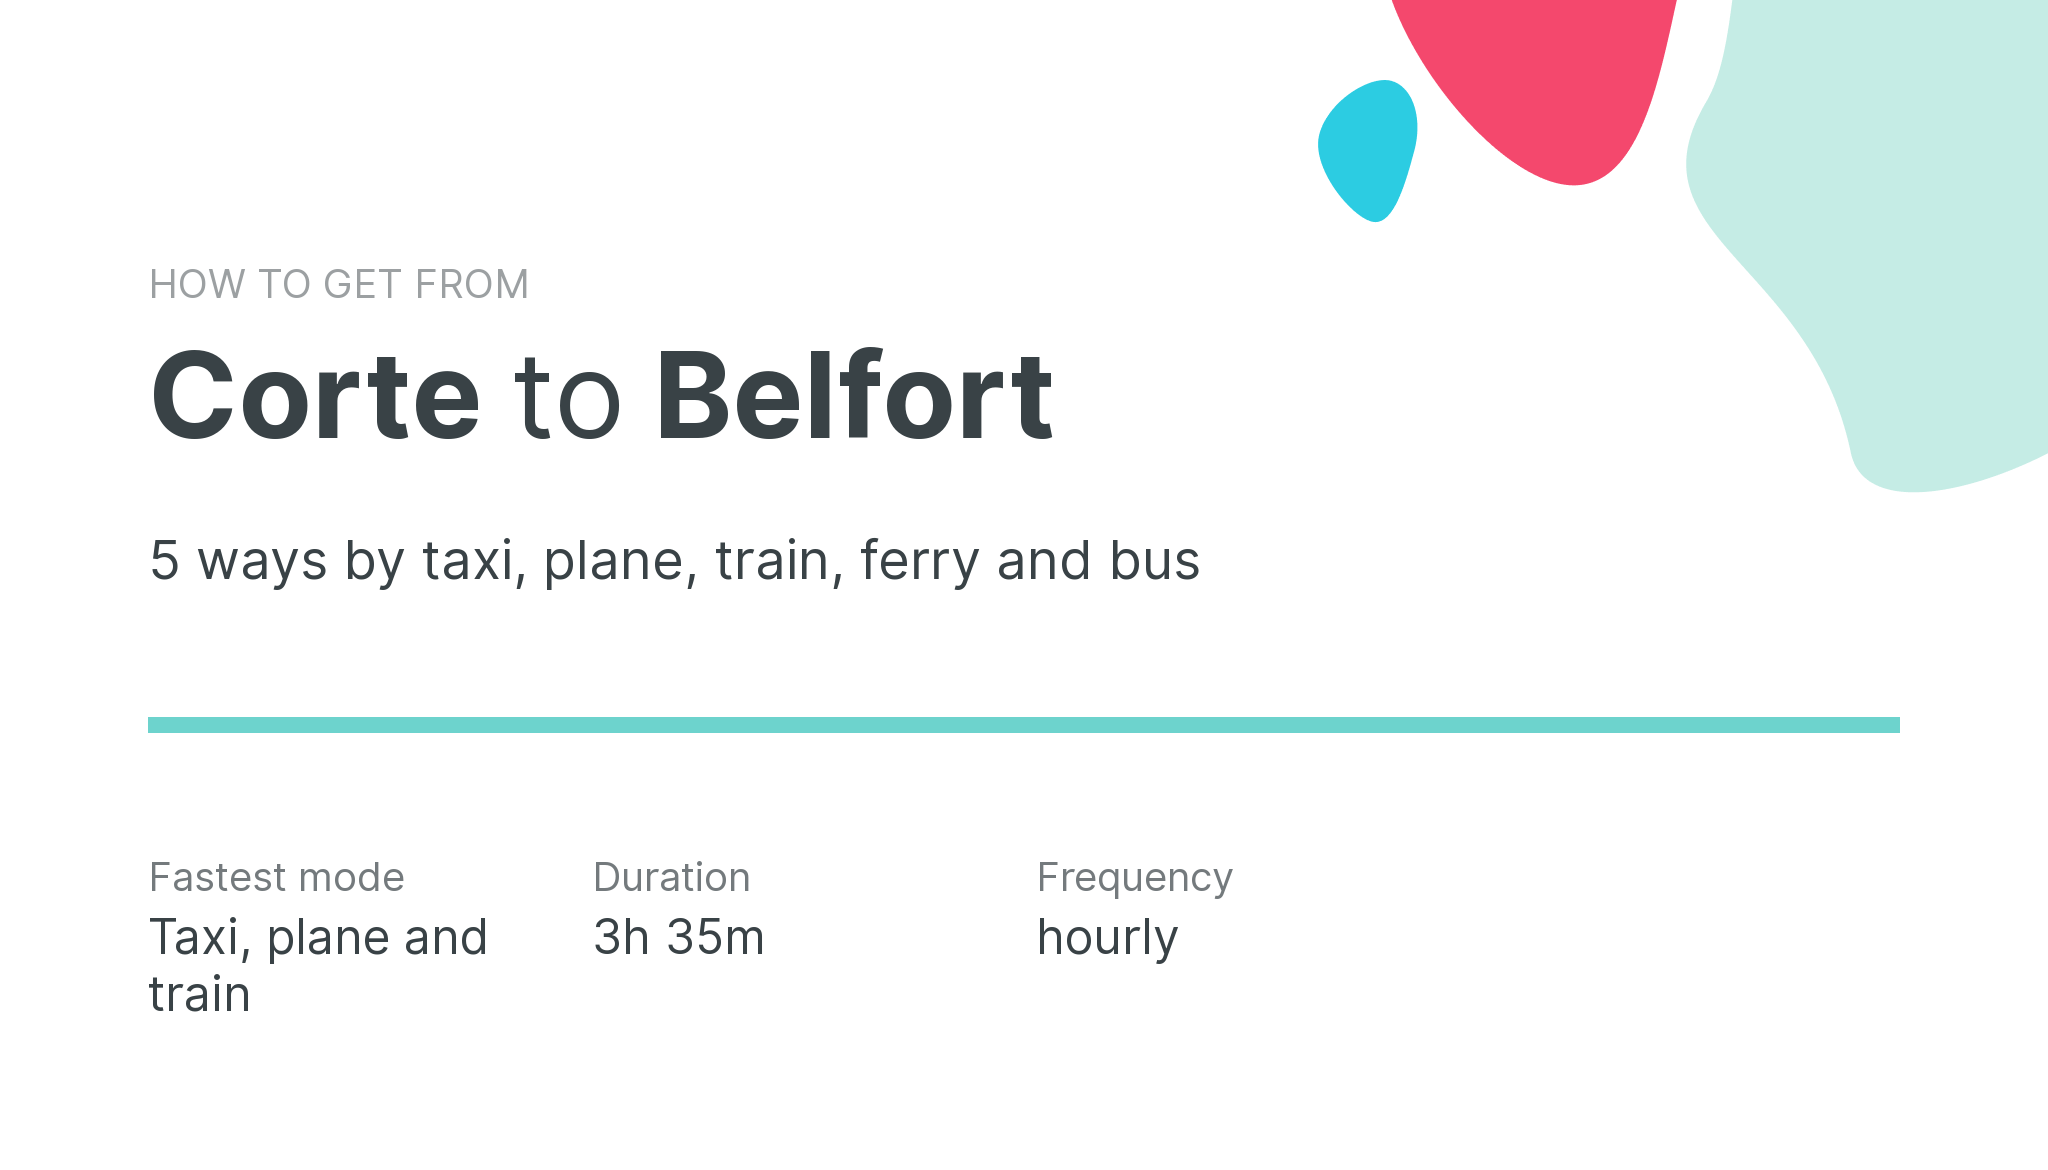 How do I get from Corte to Belfort